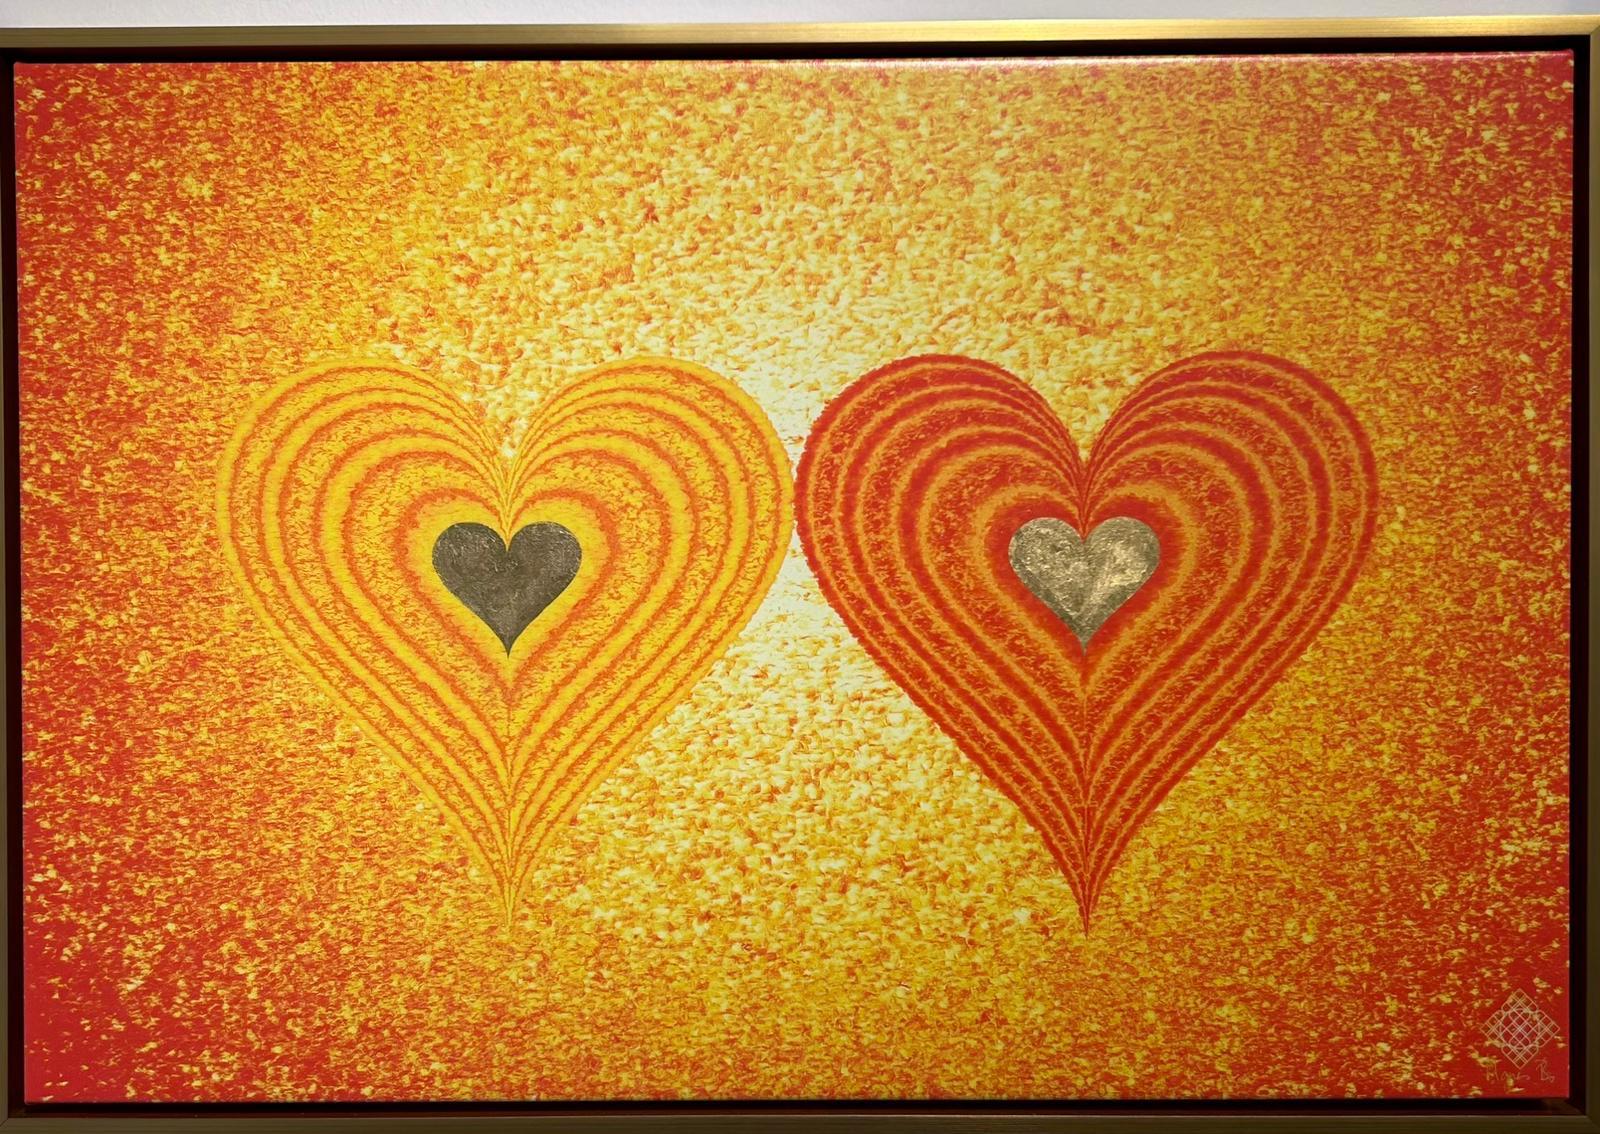 Two Hearts - Mixed Media Art by Agnes Beleznay